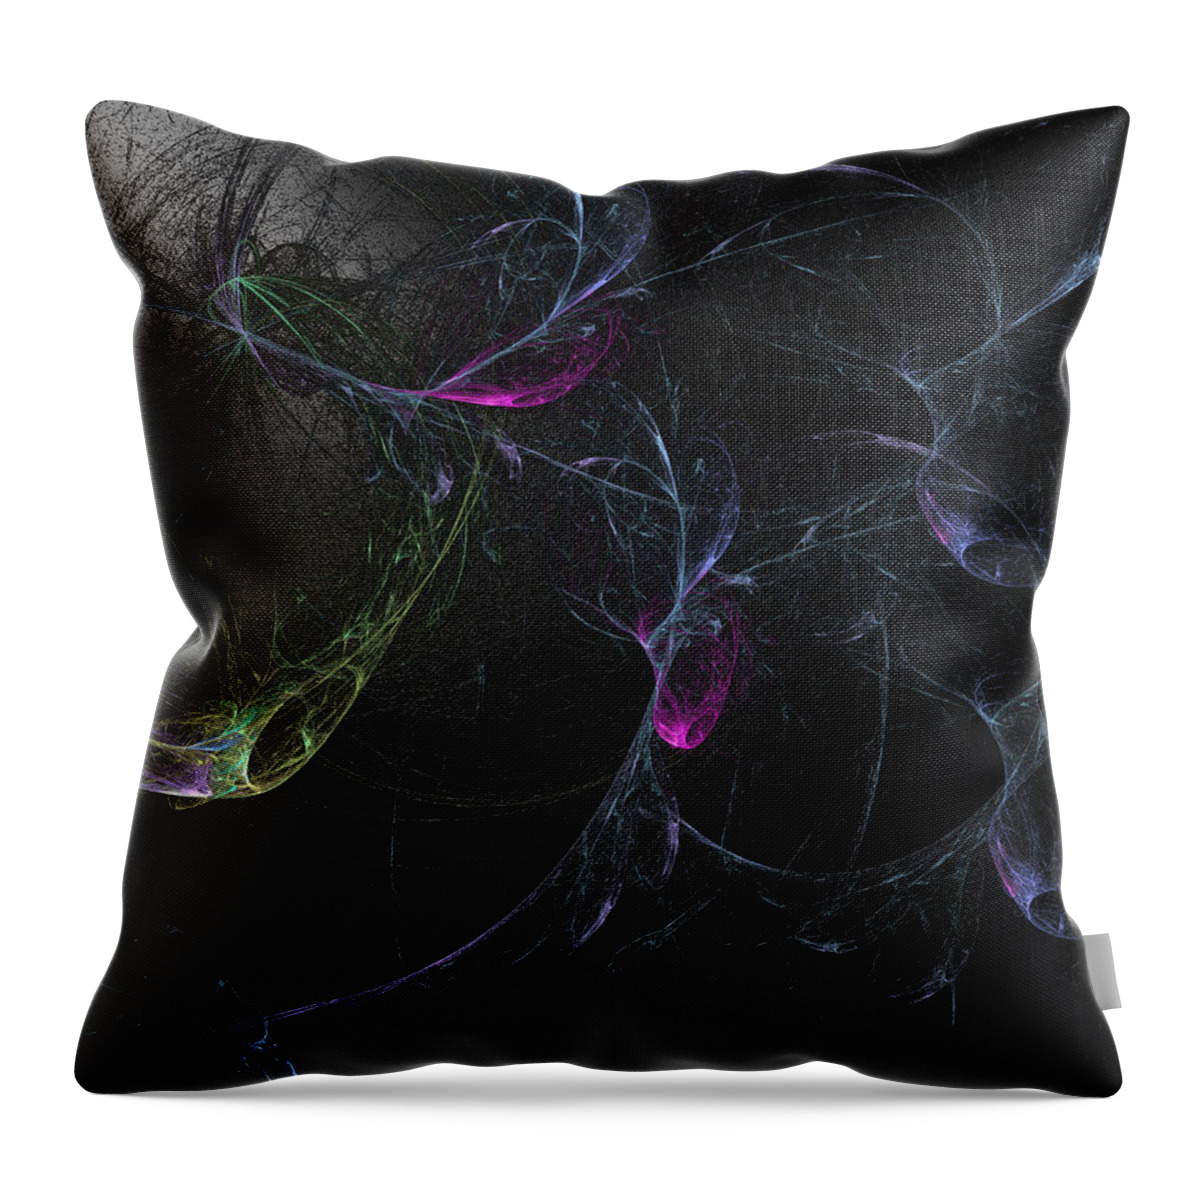 Fractal Throw Pillow featuring the digital art Affliggere by Jeff Iverson